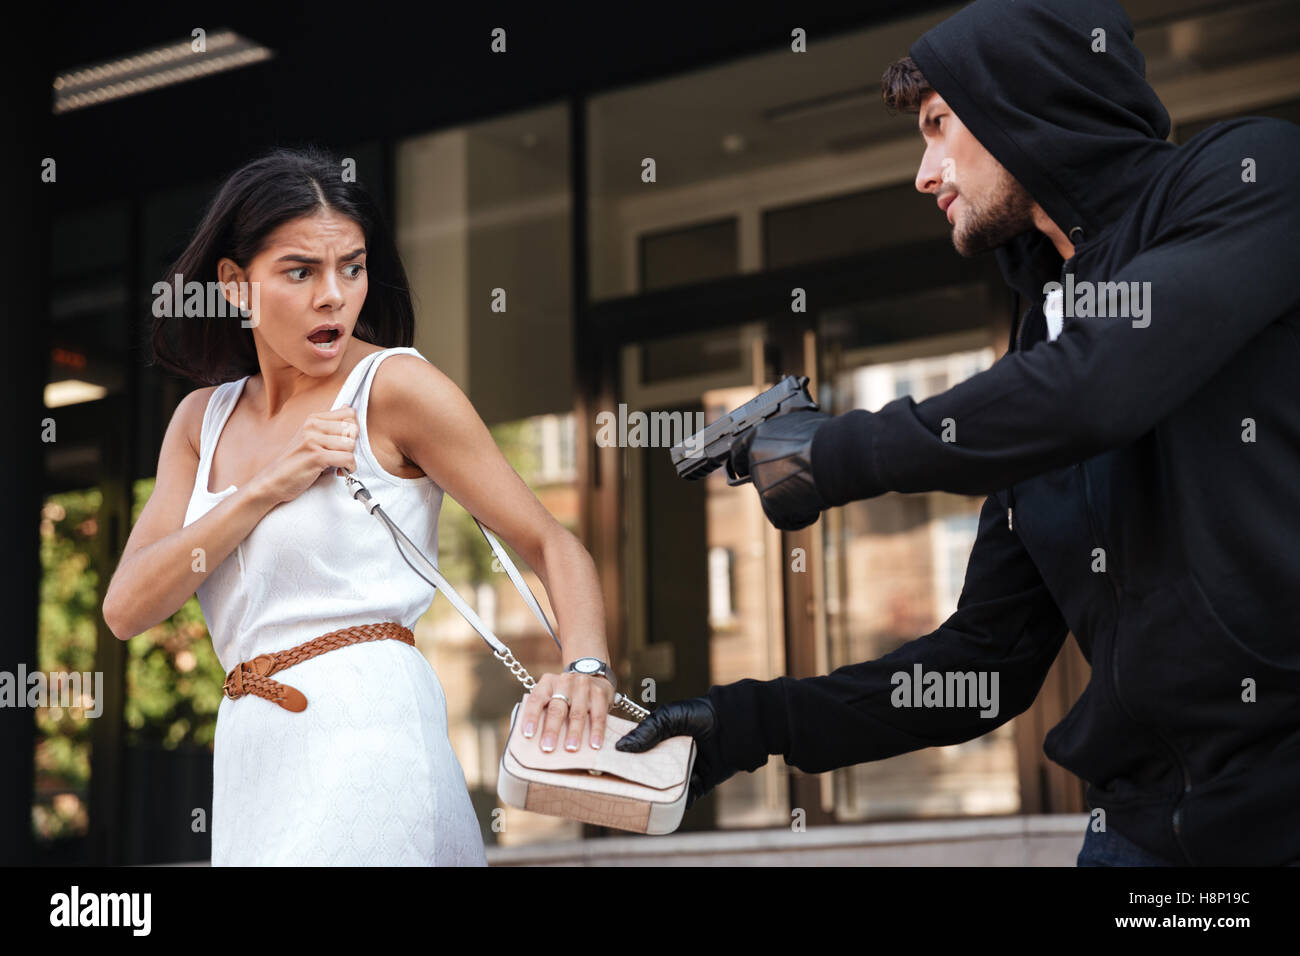 Criminal man with gun stealing bag of scared young woman on the street Stock Photo